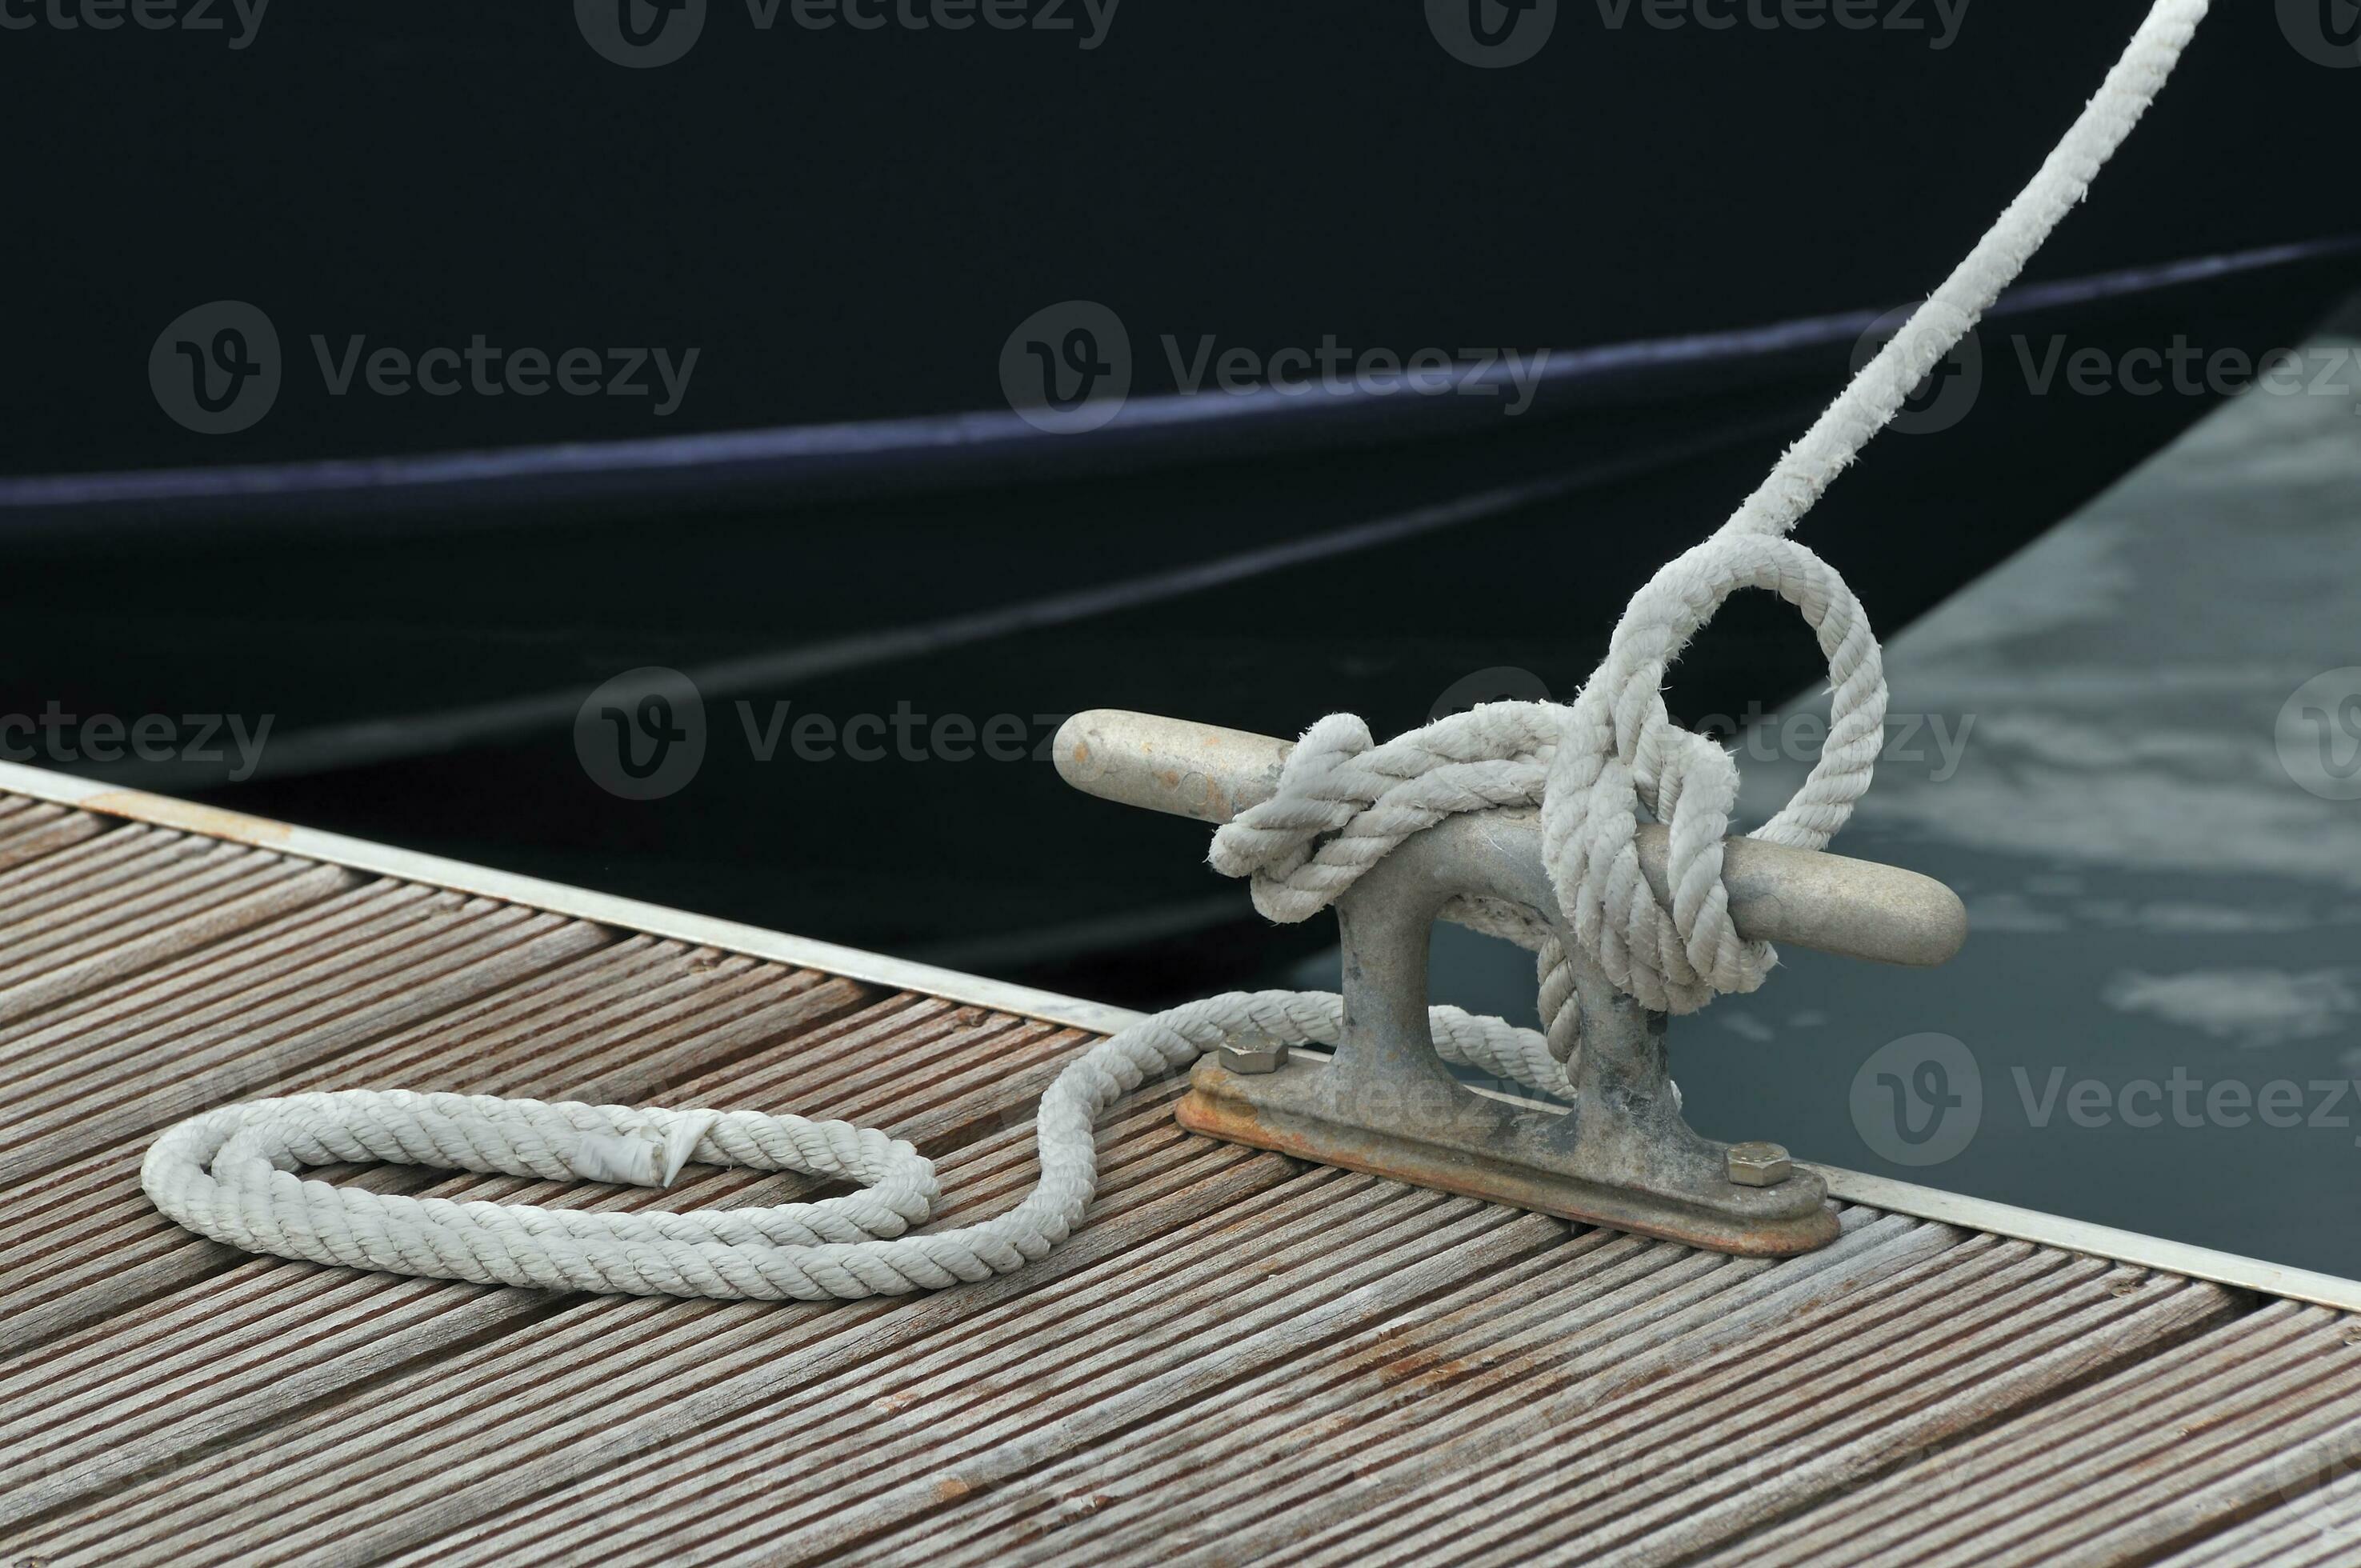 https://static.vecteezy.com/system/resources/previews/026/293/599/large_2x/mooring-boat-rope-fasten-to-cleat-on-jetty-photo.jpg